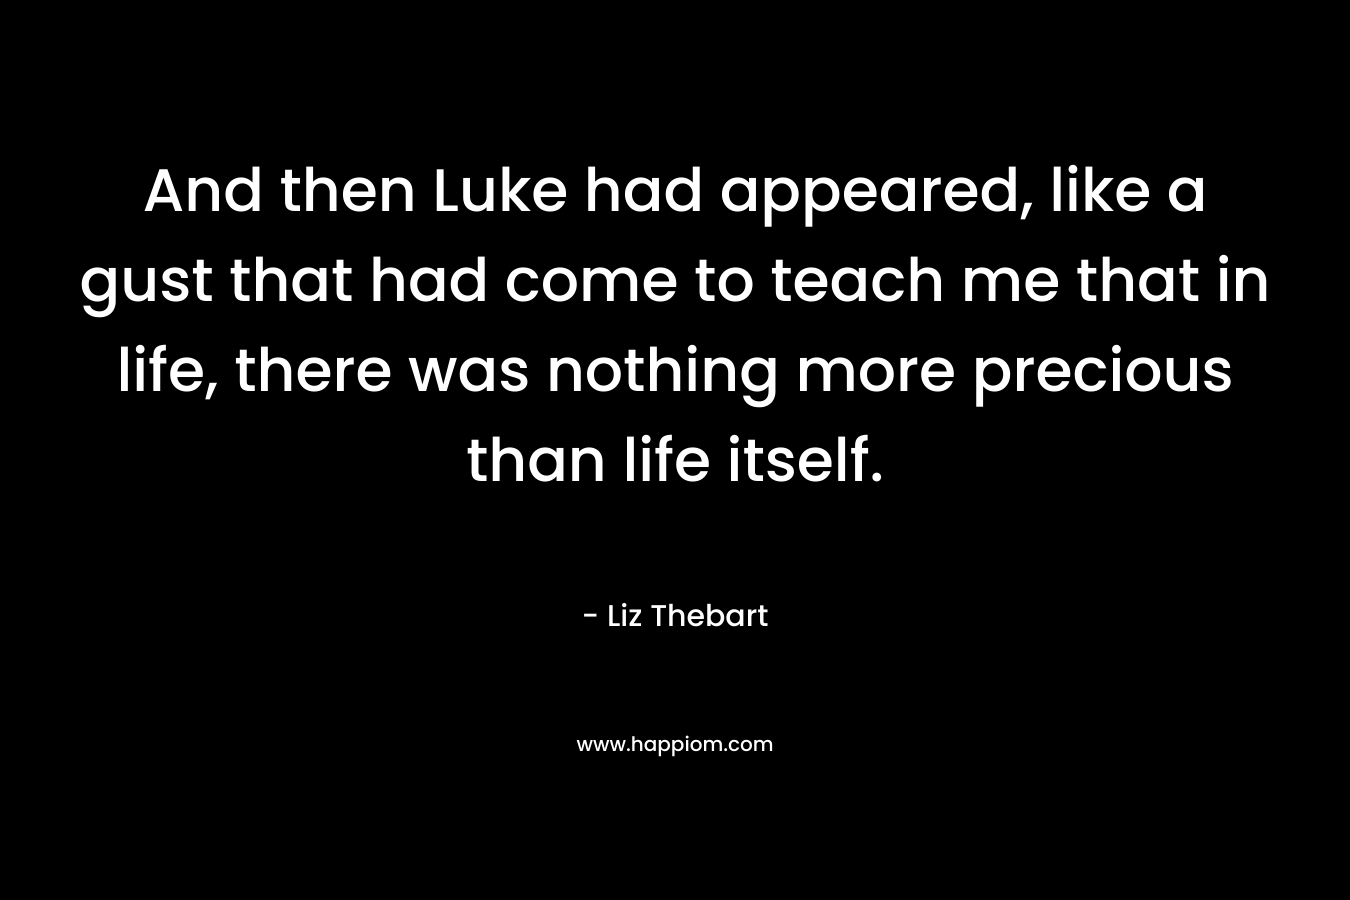 And then Luke had appeared, like a gust that had come to teach me that in life, there was nothing more precious than life itself. – Liz Thebart